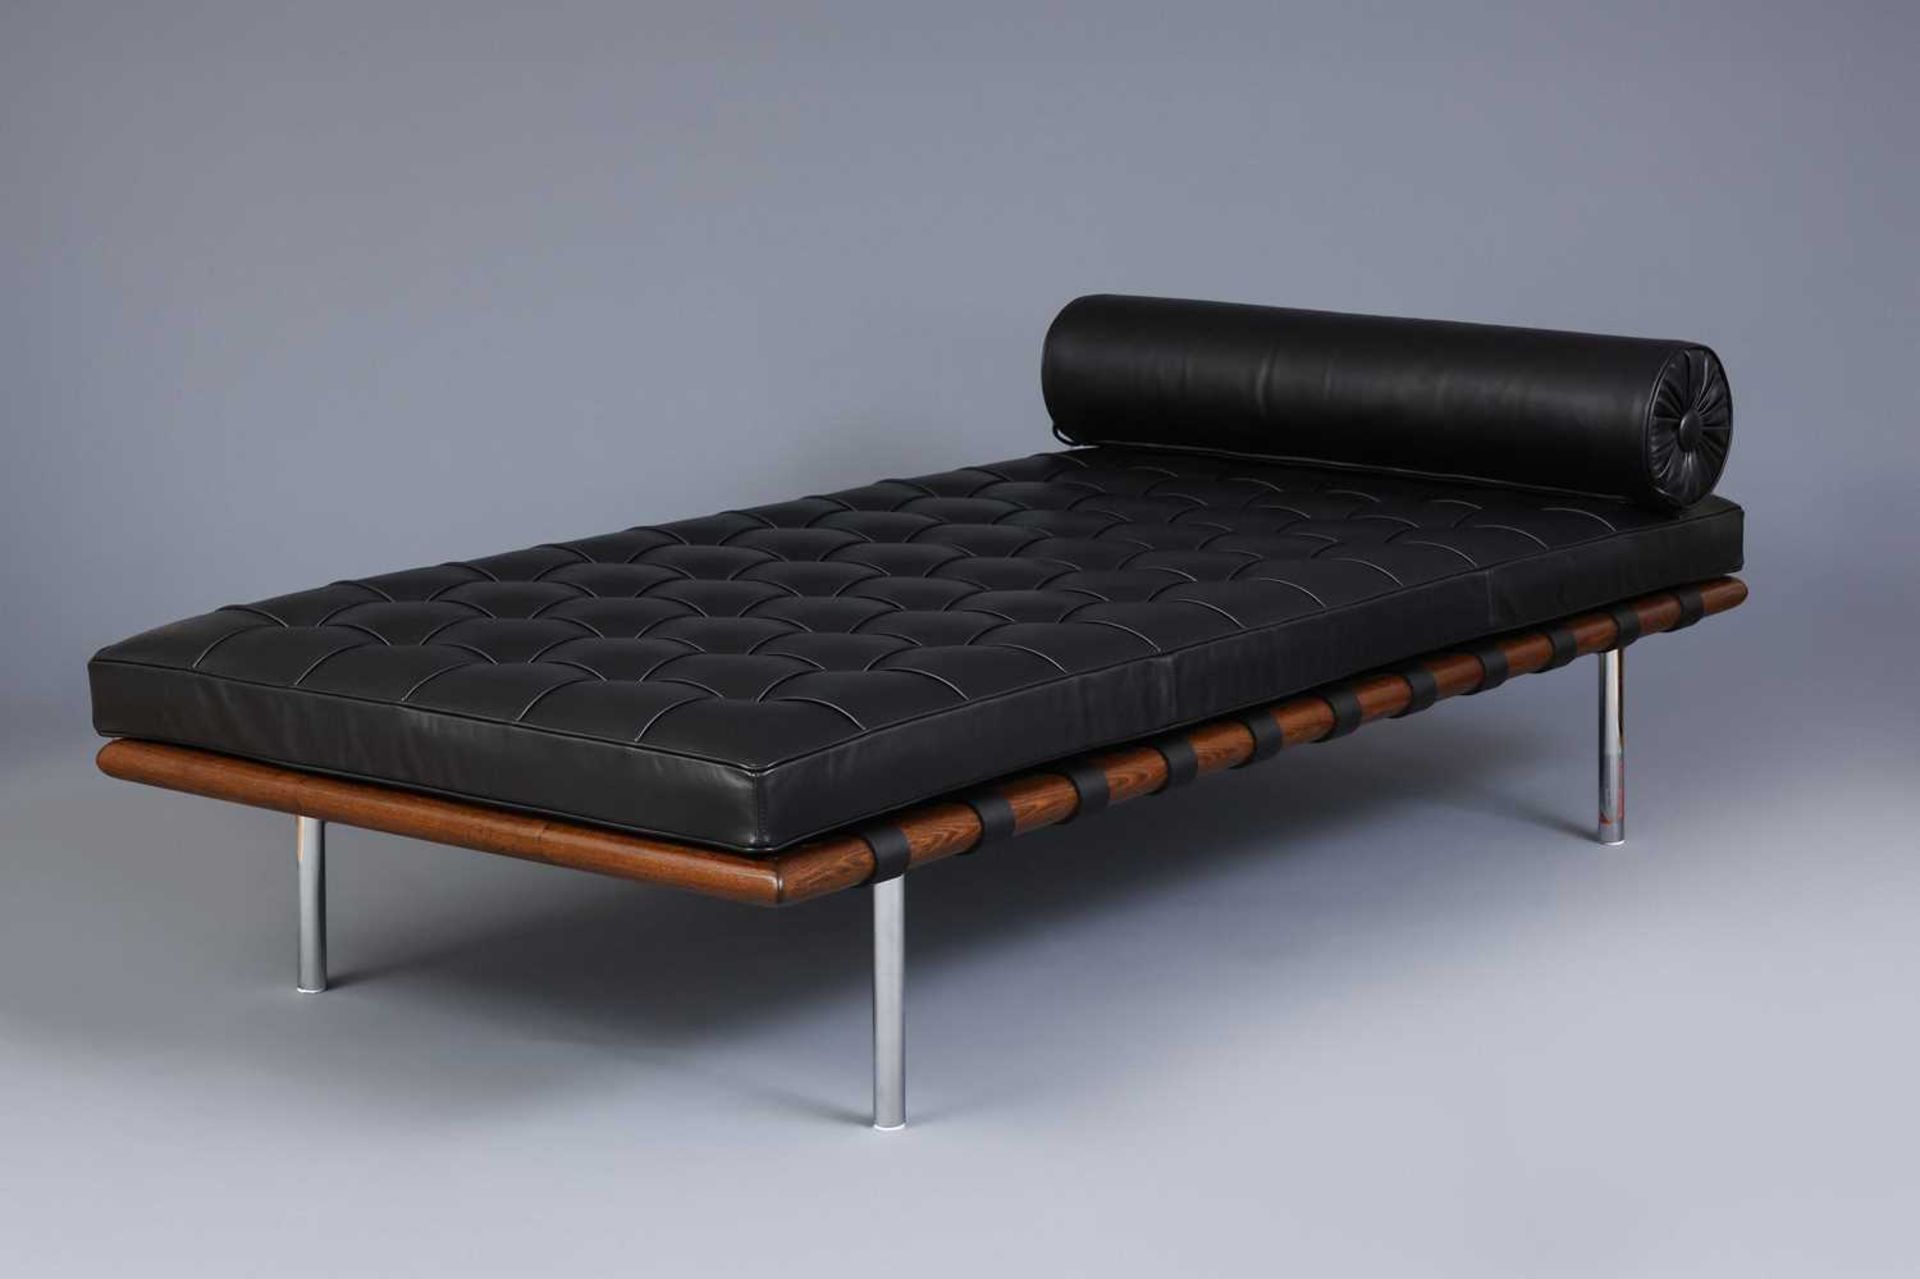 KNOLL "Barcelona" Daybed